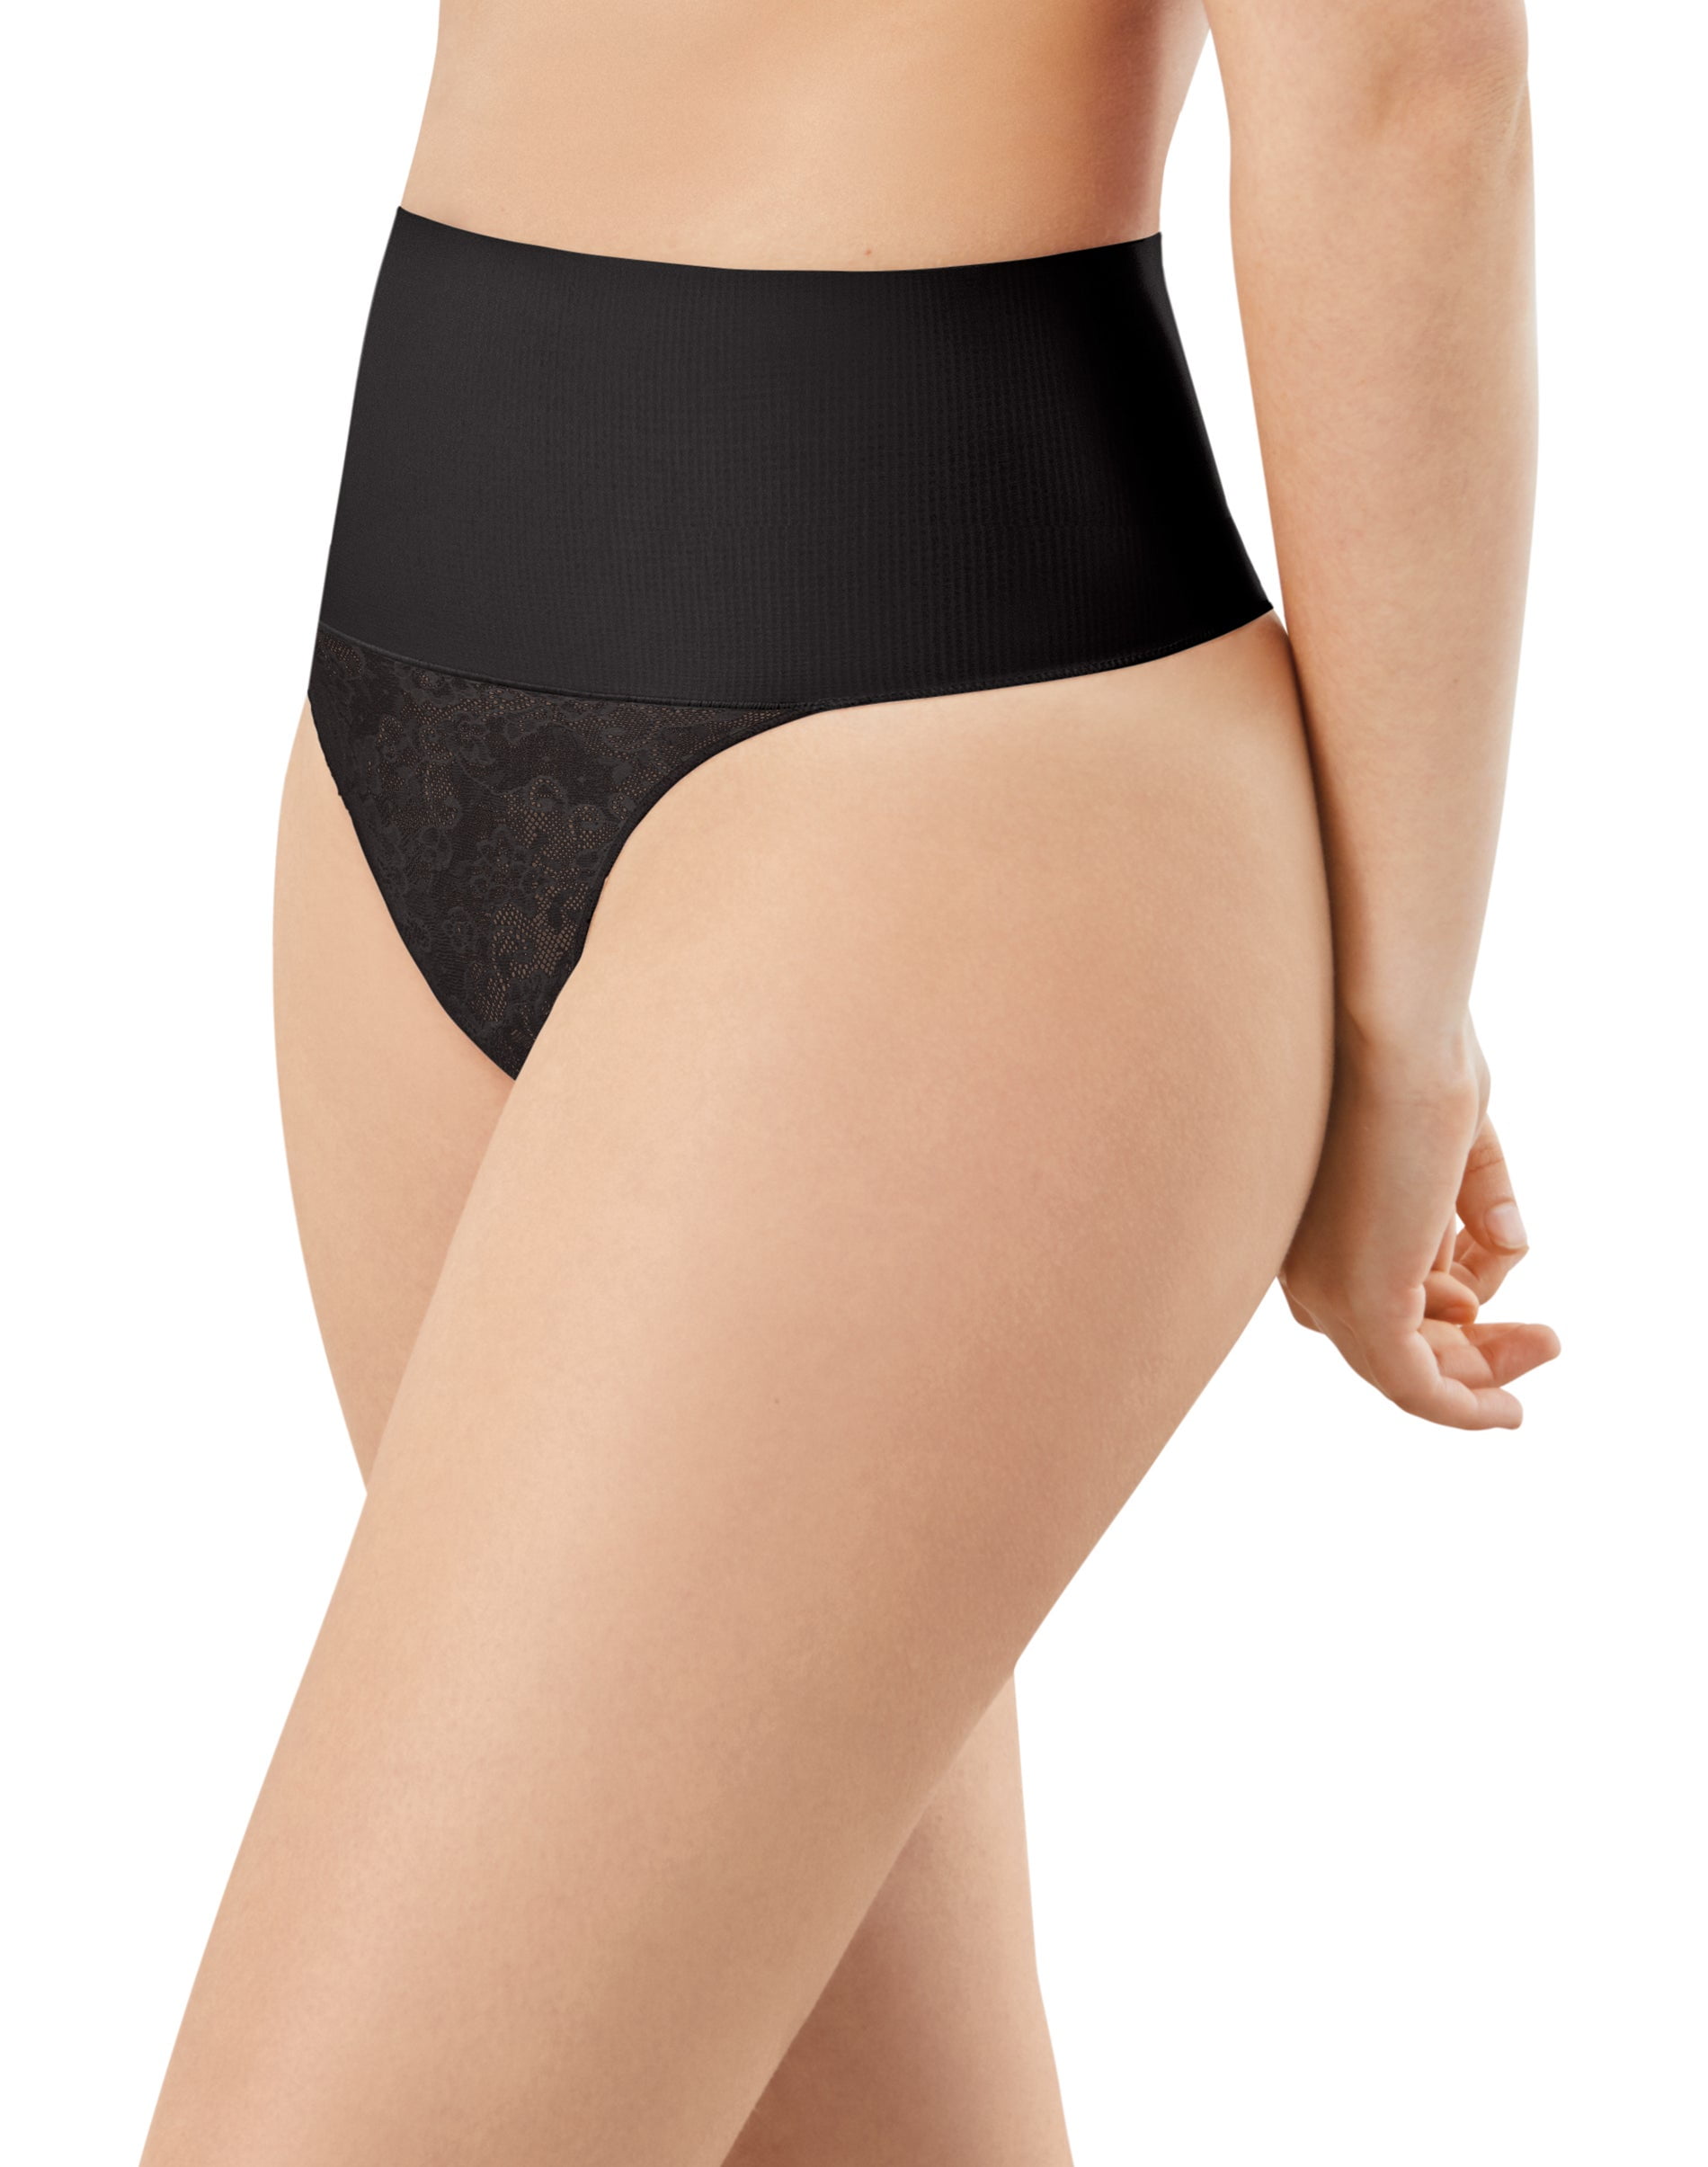 Maidenform Tame Your Tummi High Waist Lace Thong DMS7070 size M